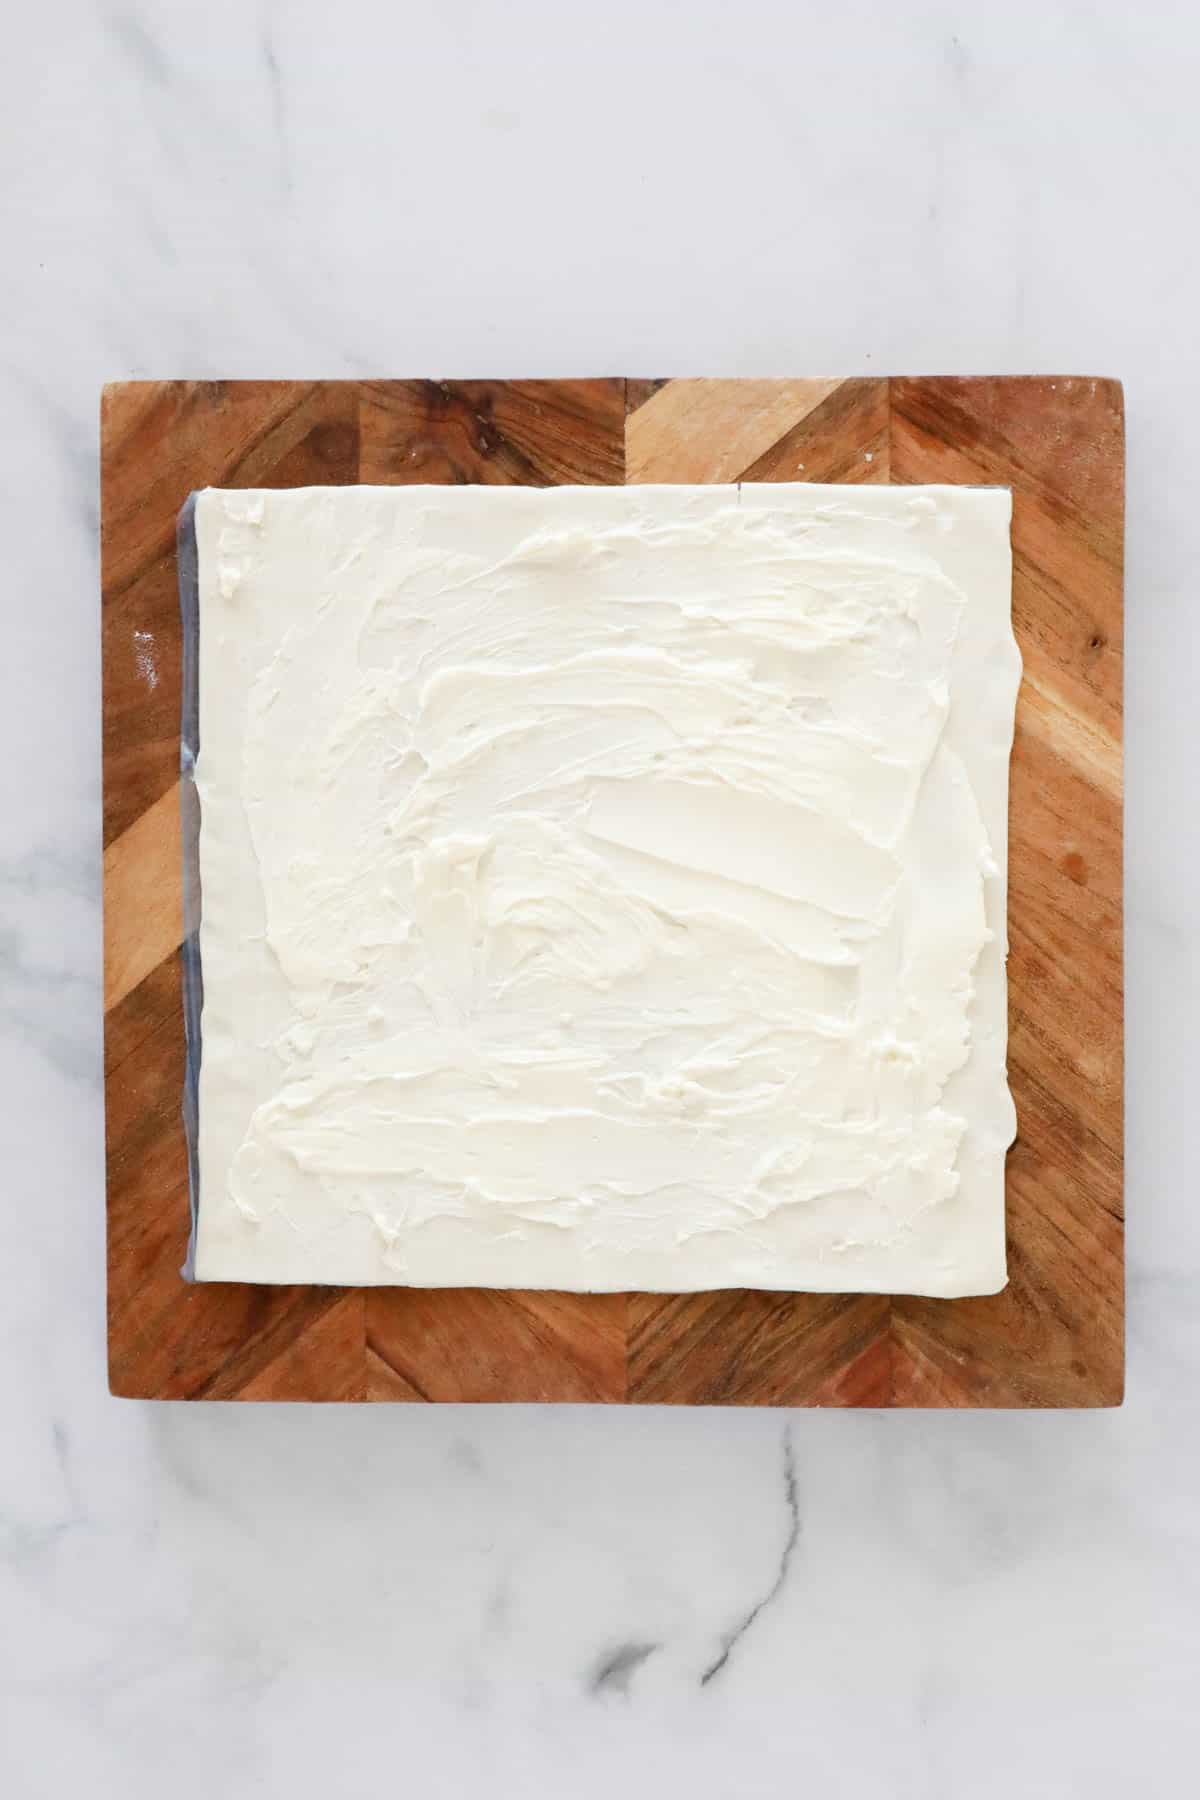 Cream cheese spread on a sheet of puff pastry.